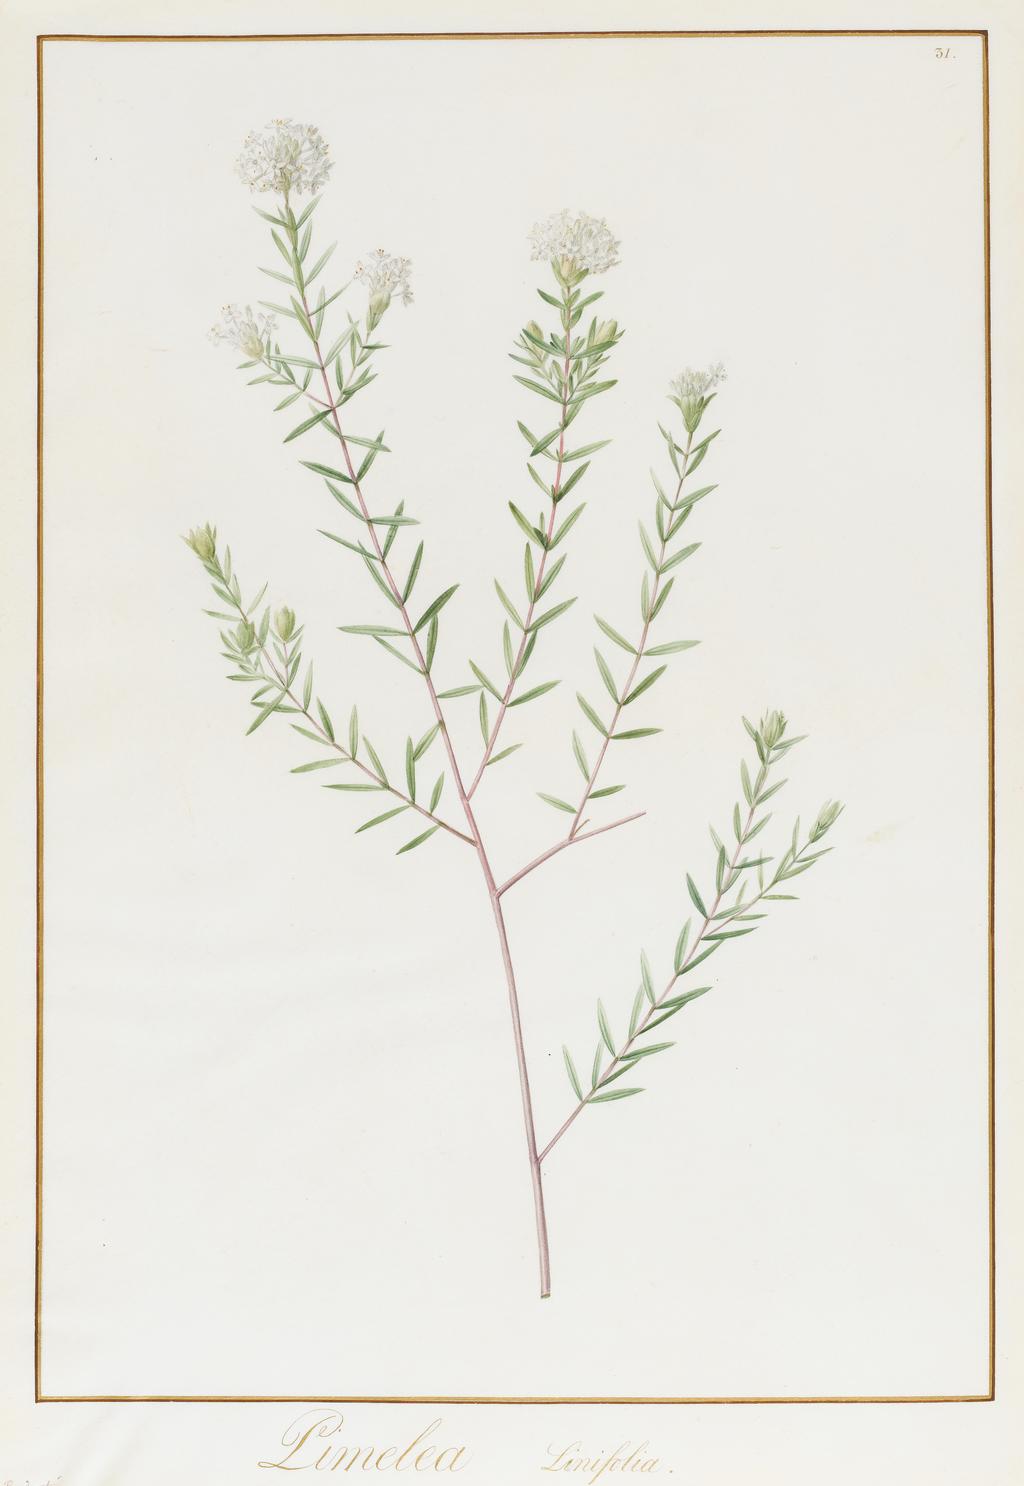 An image of Pimelea Linifolia. Redouté, Pierre Joseph (Flemish, 1759-1840). Watercolour and bodycolour over graphite on vellum, margins ruled in red and gold ink, height 447 mm, width 318 mm, 1812.